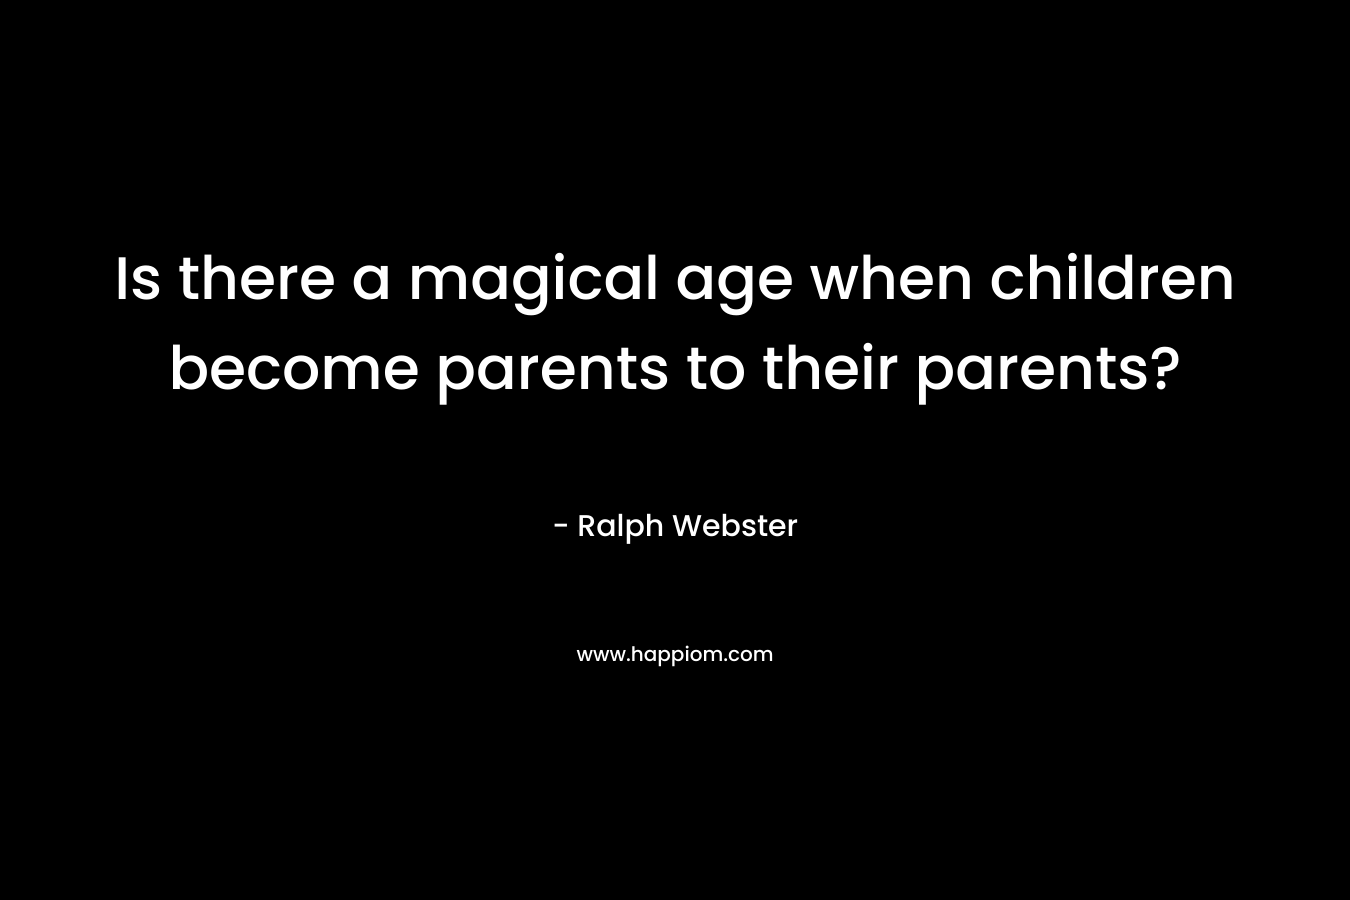 Is there a magical age when children become parents to their parents?